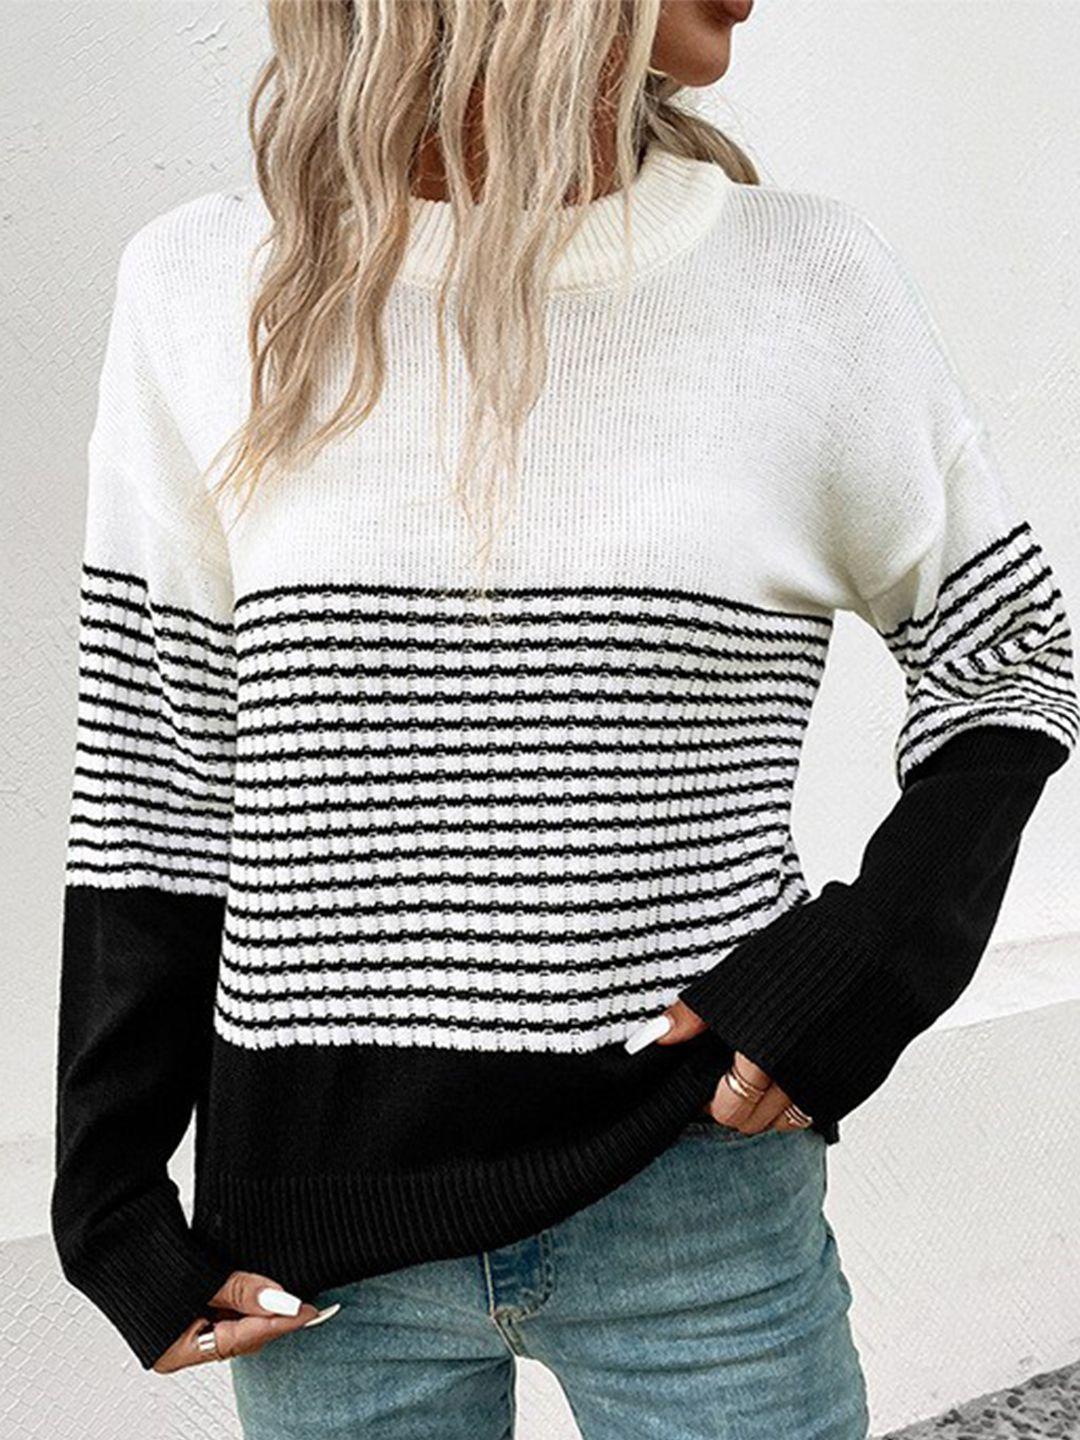 stylecast-white-&-black-striped-acrylic-pullover-sweater